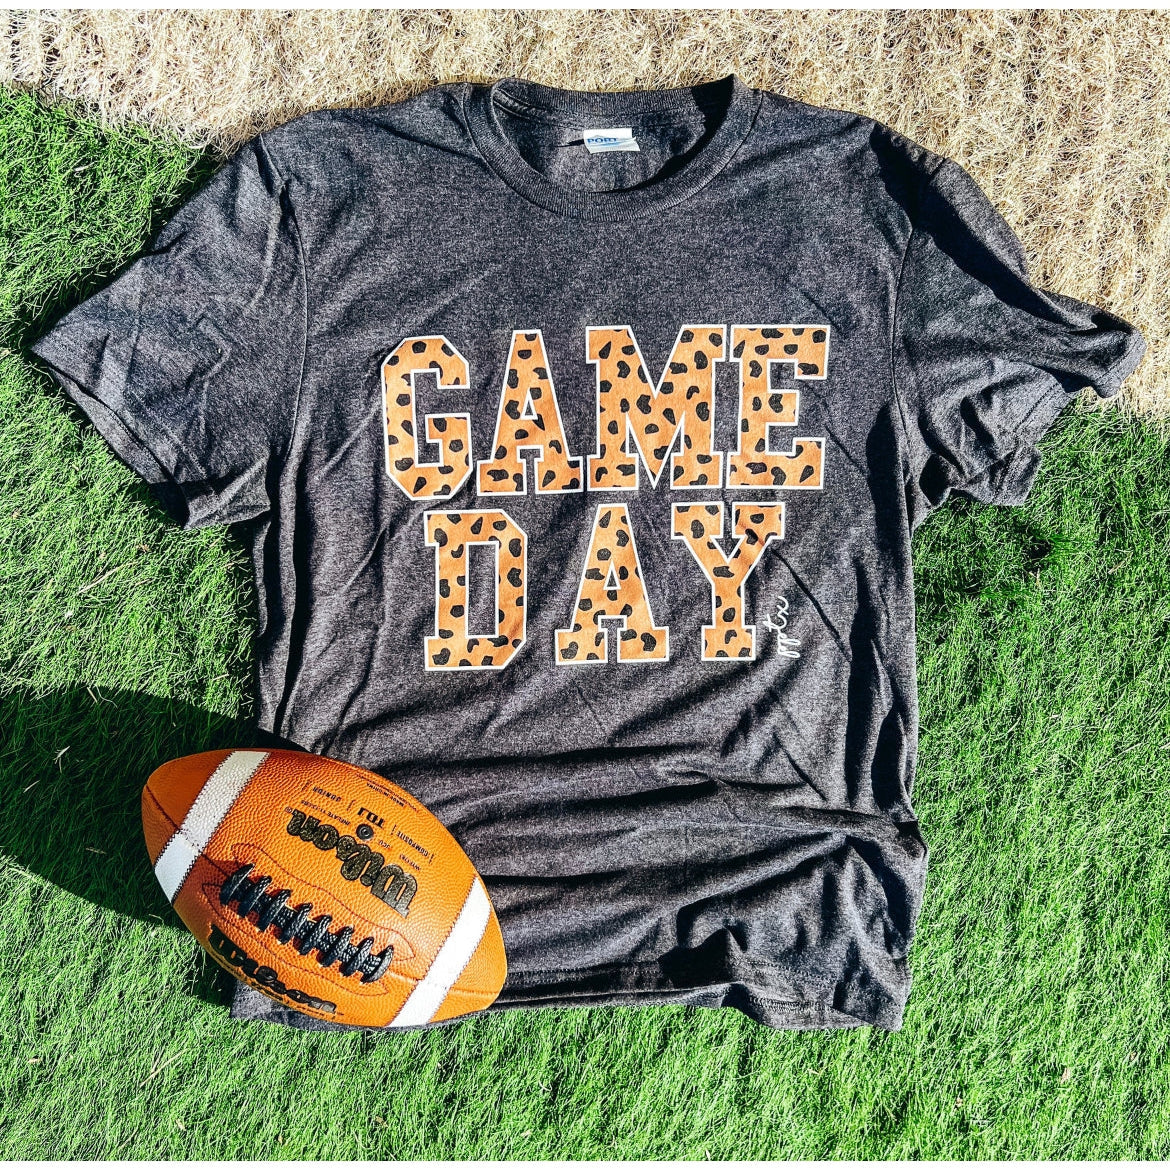 GAME DAY TEE-Body and Sol